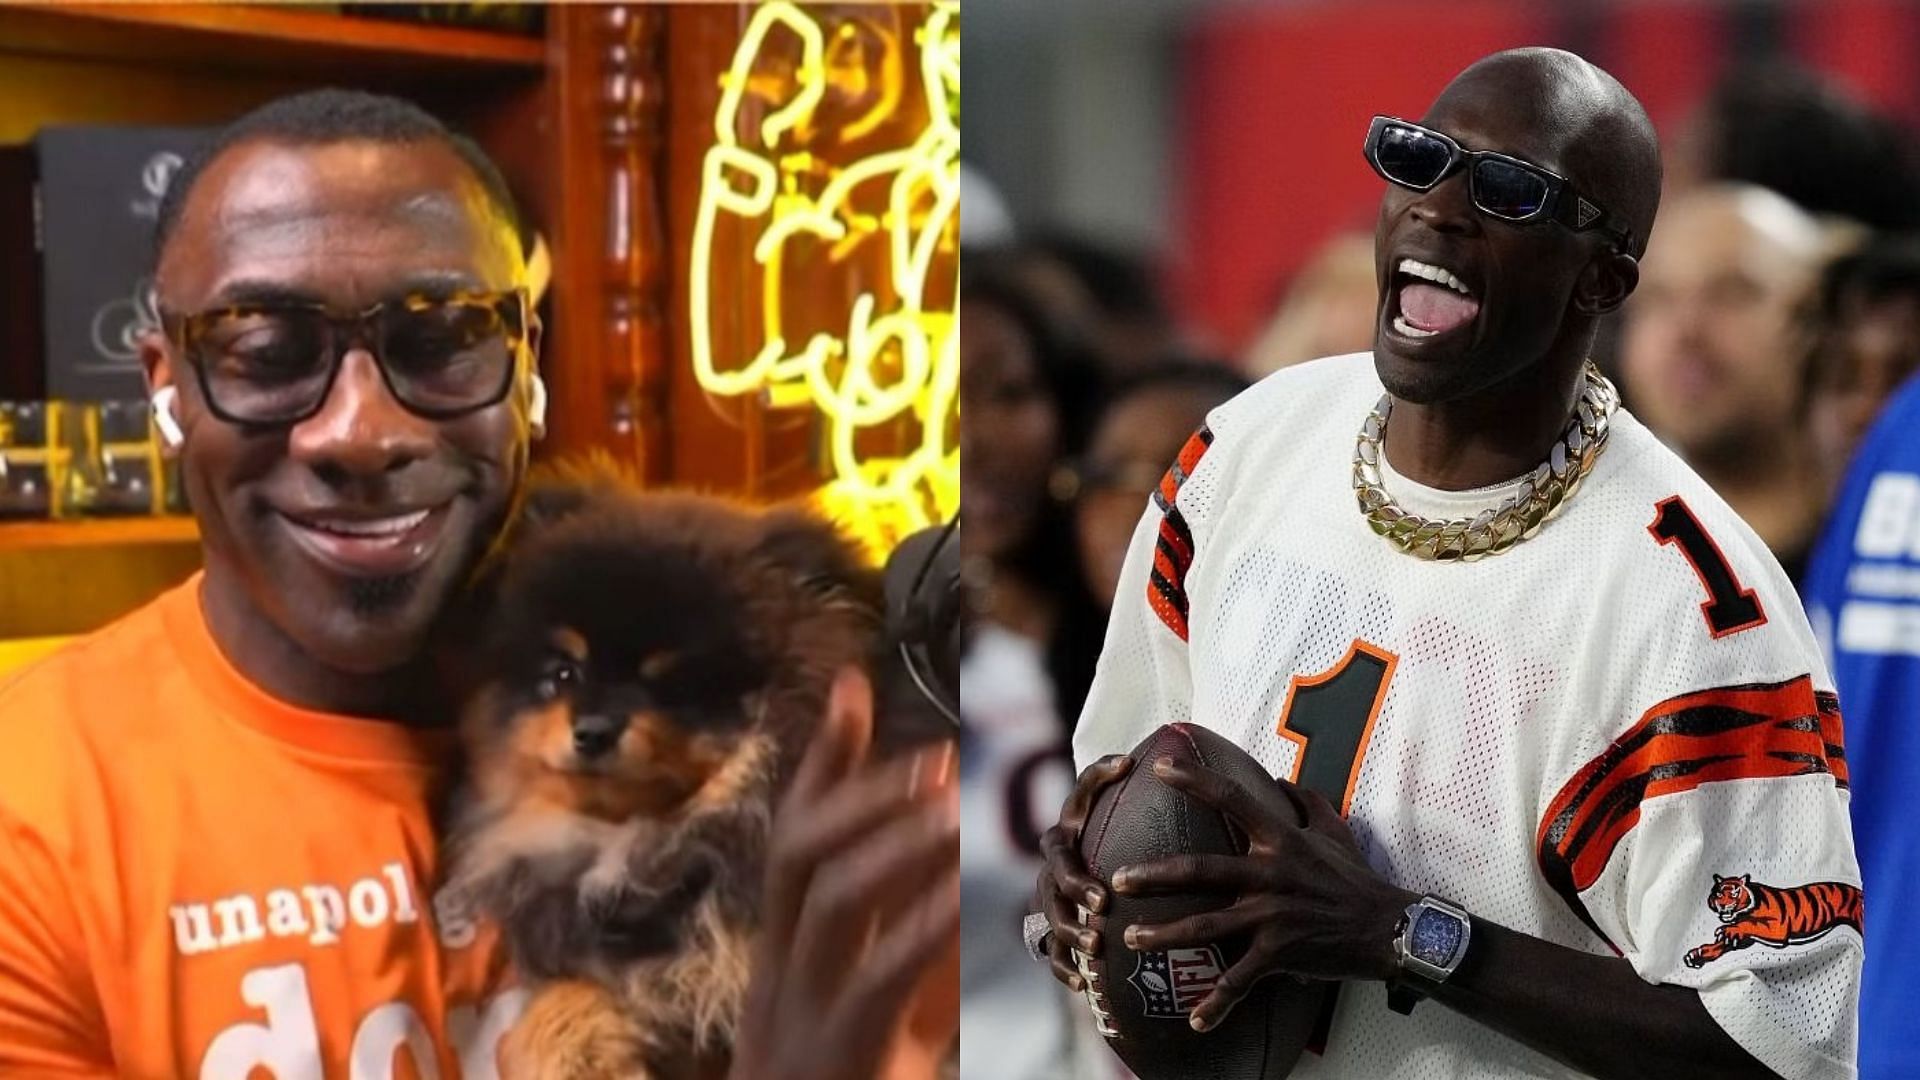 Chad Johnson cannot believe that Shannon Sharpe once paid $10,000 for a dog